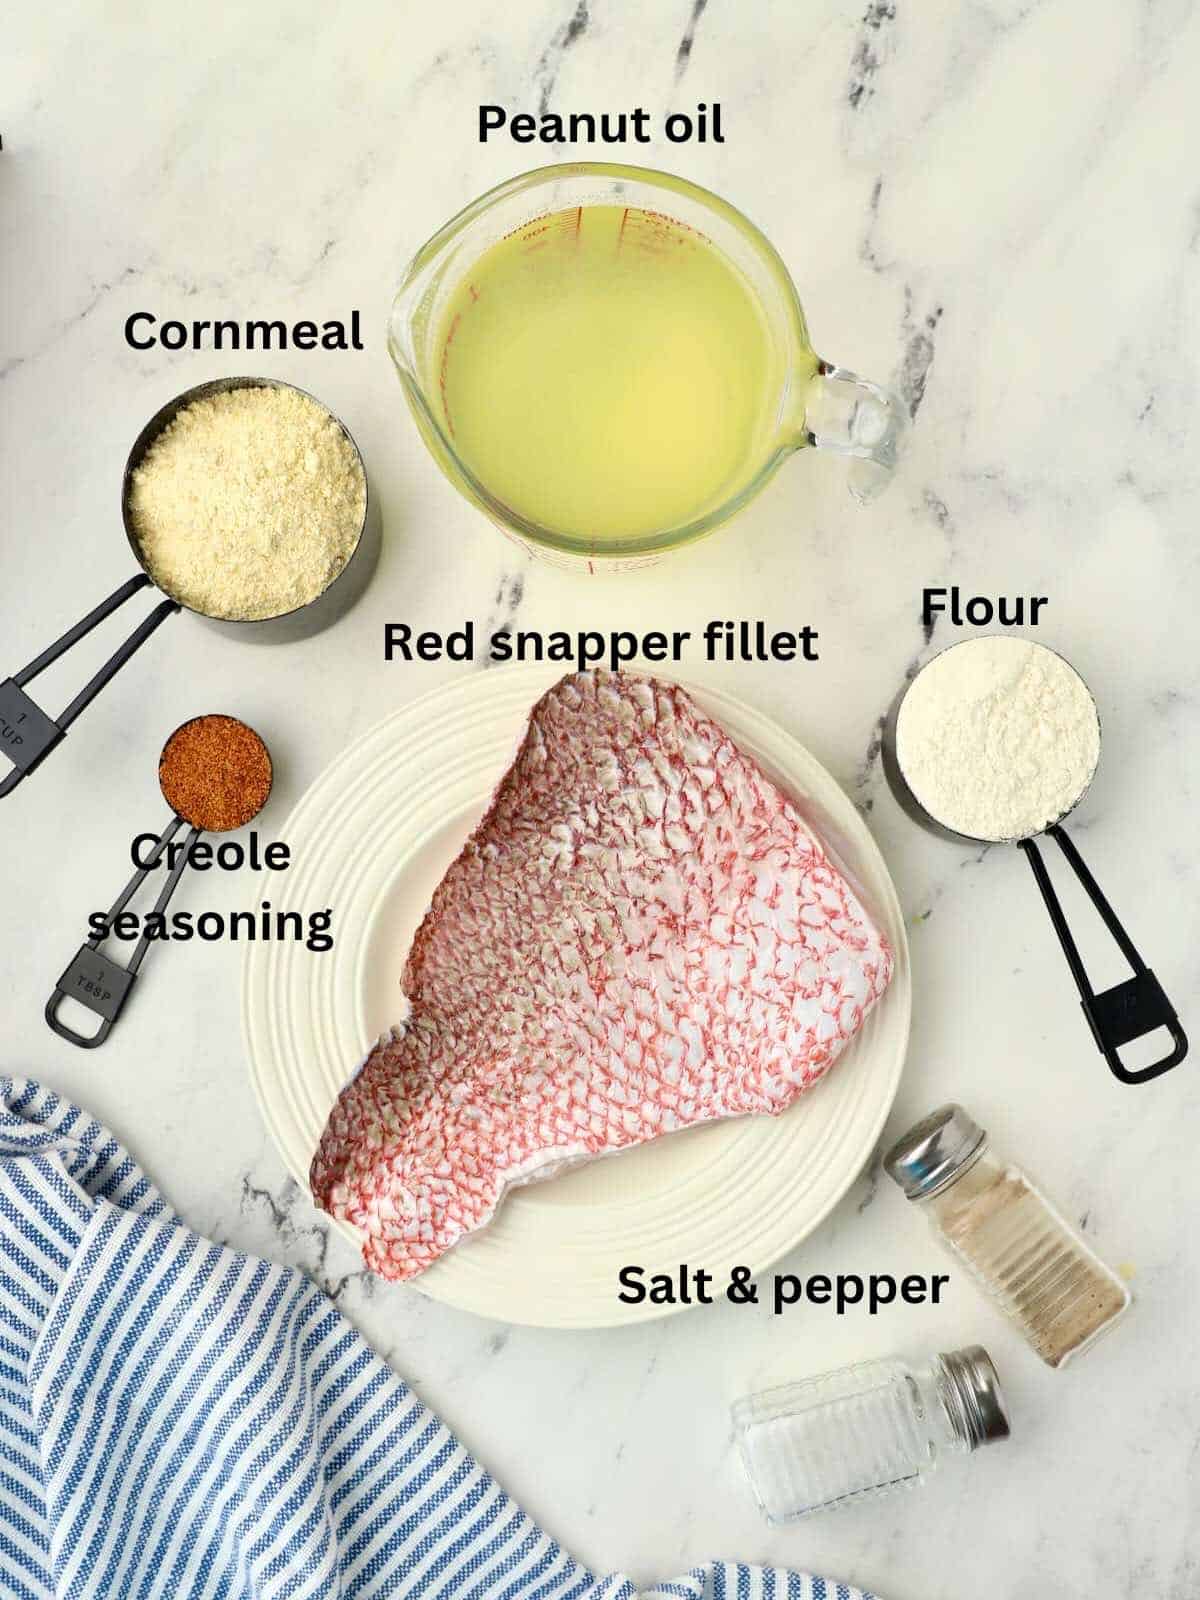 Ingredients to make fried snapper including a fish fillet, cornmeal, flour and peanut oil.